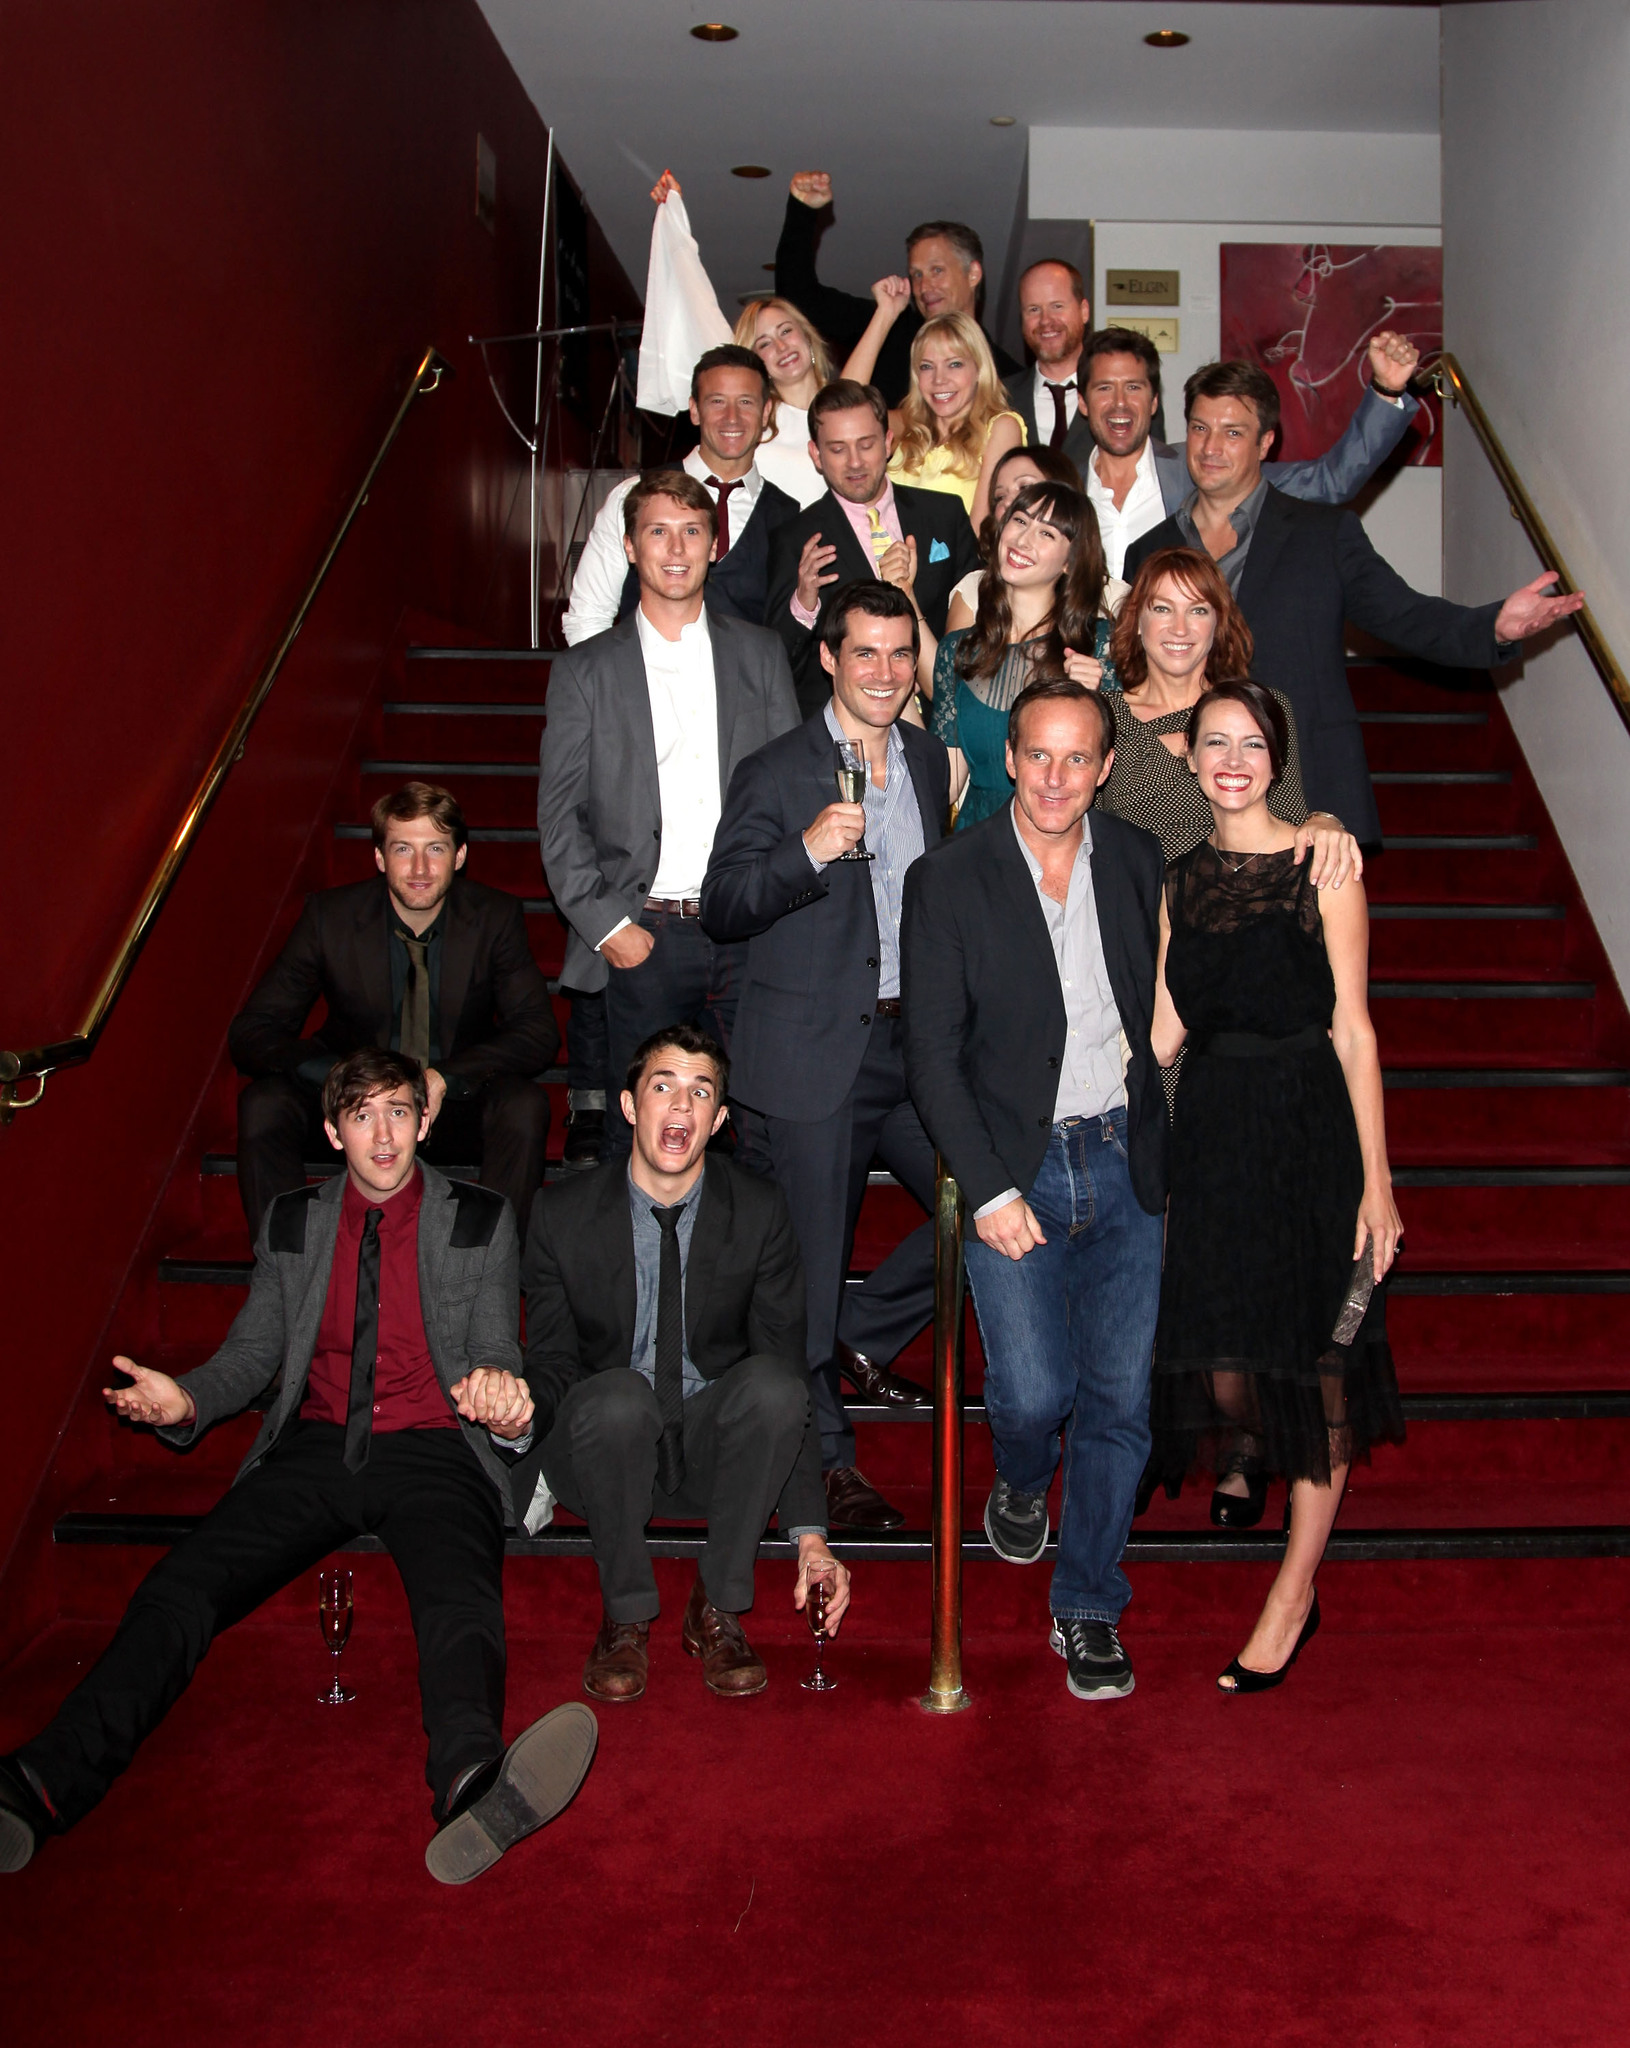 Spencer Treat Clark, Amy Acker, Clark Gregg, Alexis Denisof, Reed Diamond, Nathan Fillion, Ashley Johnson, Fran Kranz, Tom Lenk, Sean Maher, Joss Whedon, Riki Lindhome, Nick Kocher, Brian McElhaney, Jillian Morgese and Kai Cole at event of Much Ado About Nothing (2012)